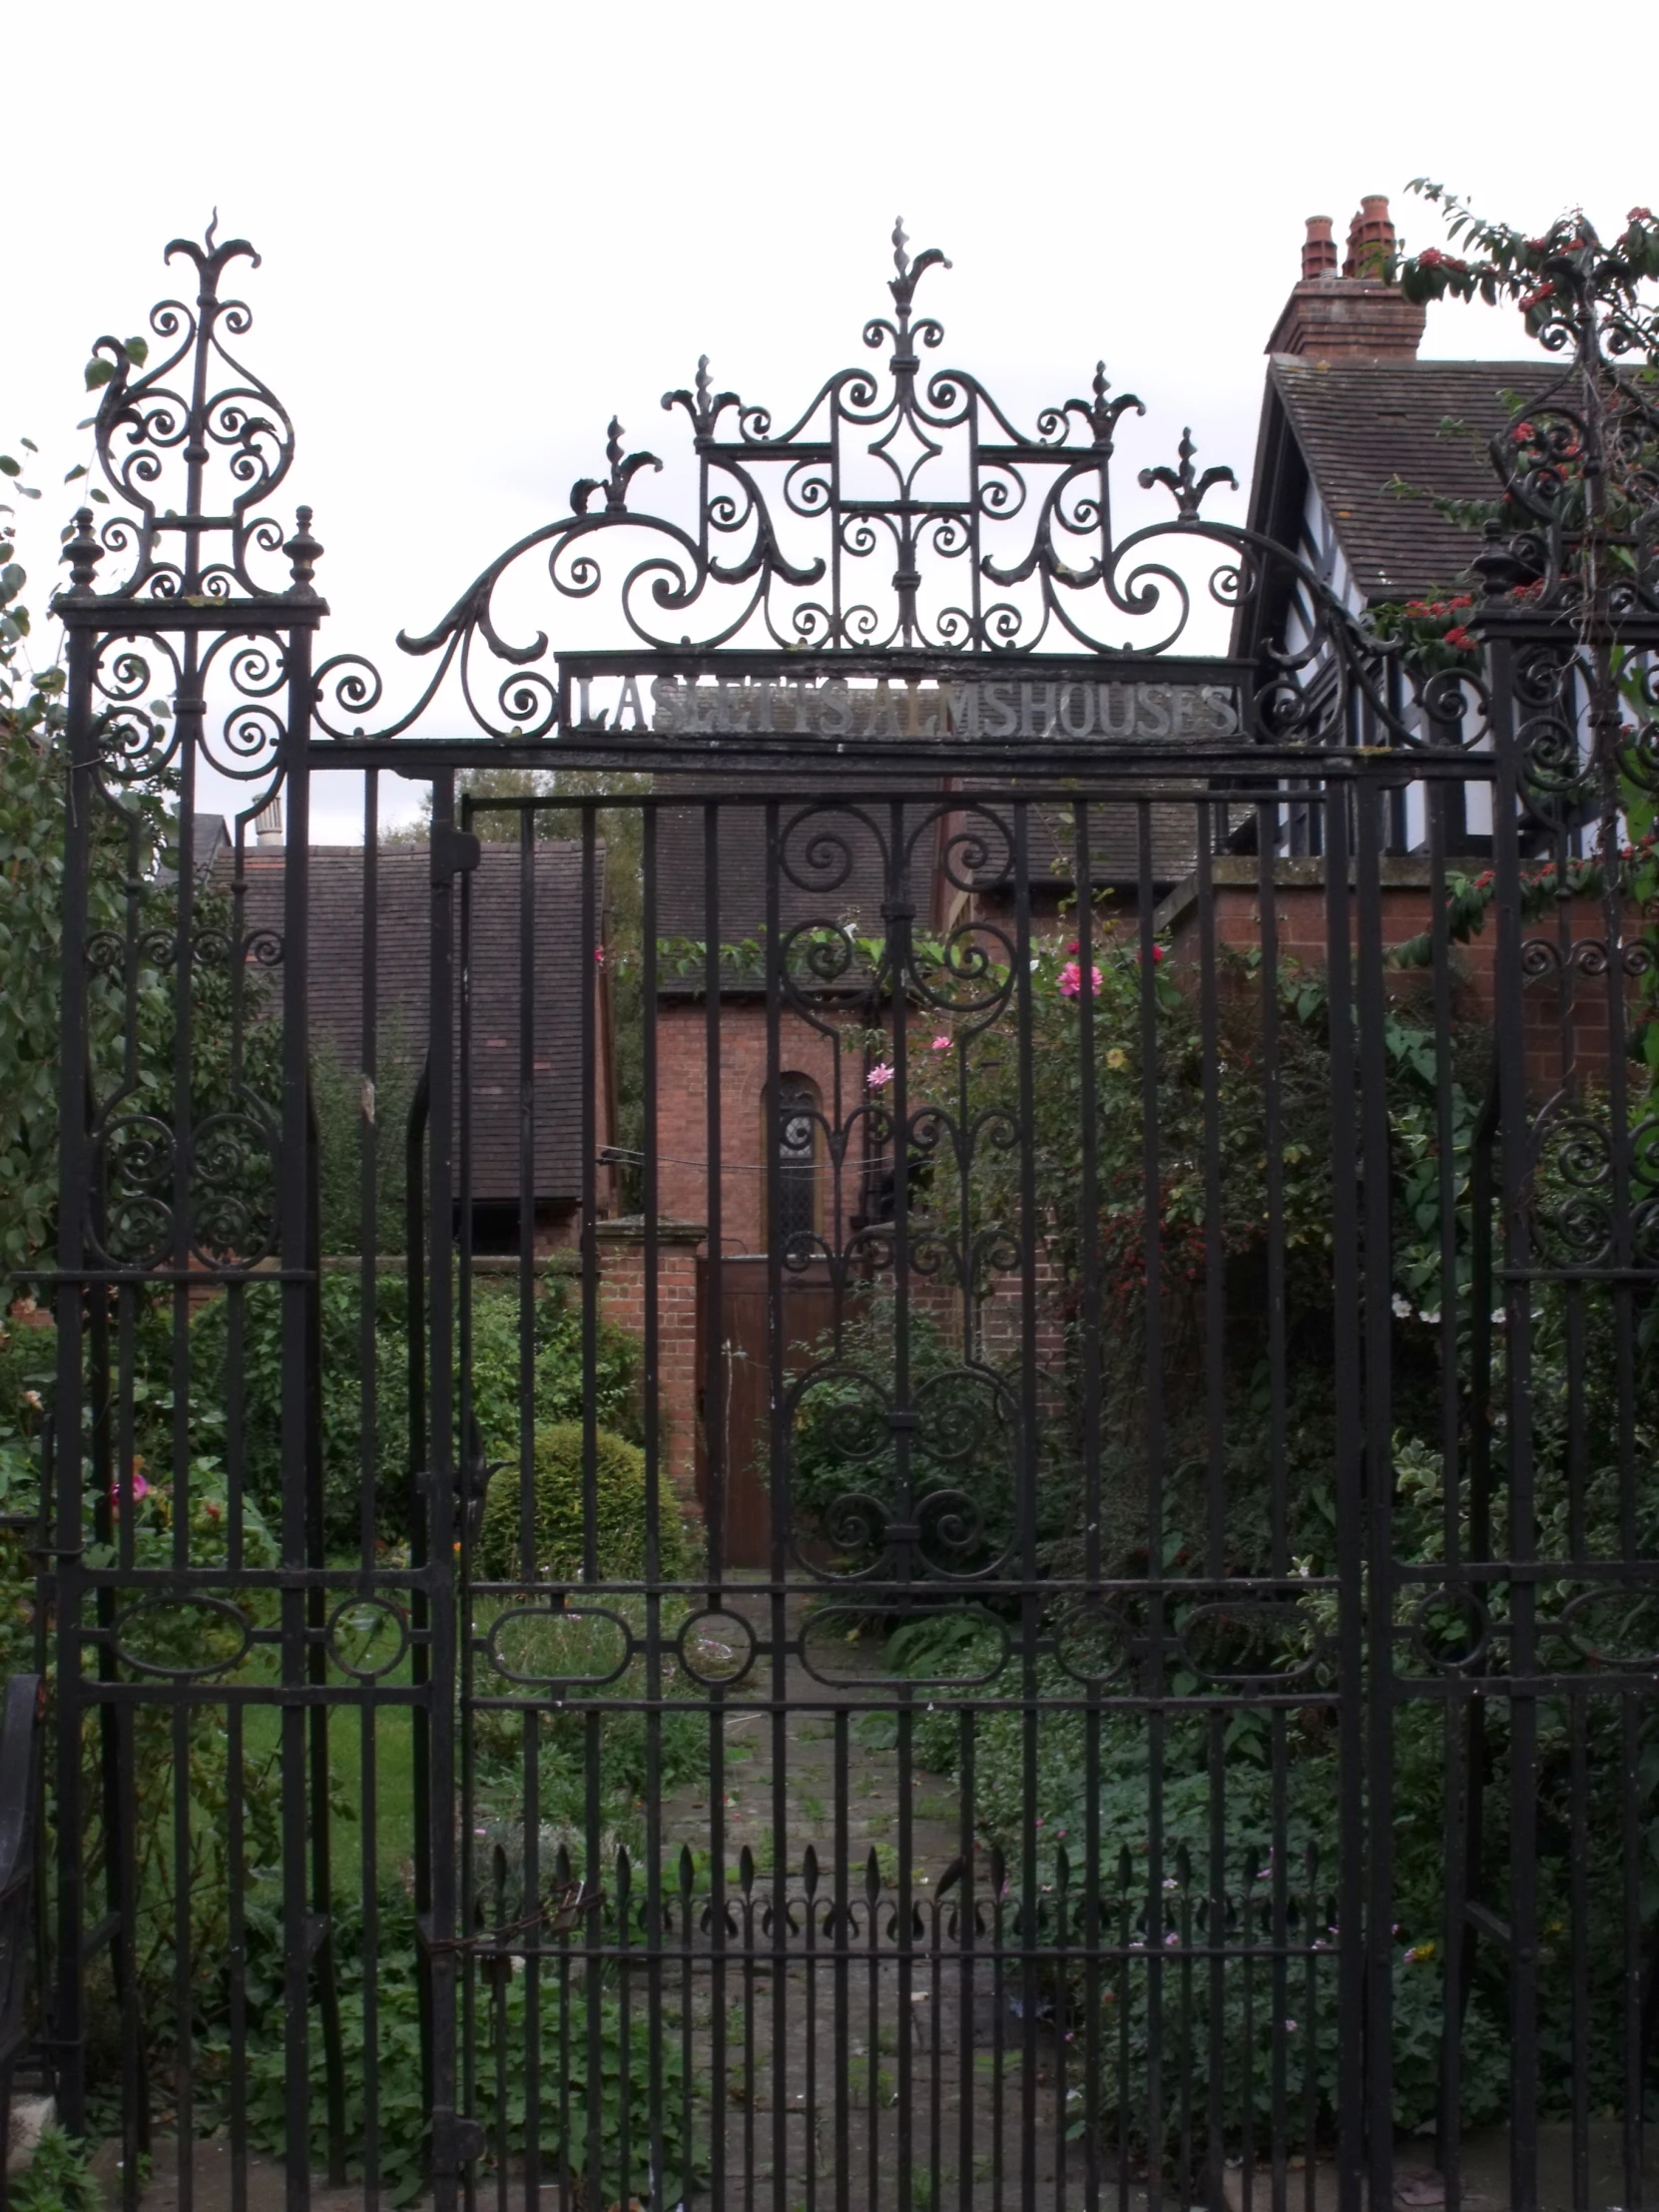 this is an iron gate surrounded by vines and a house